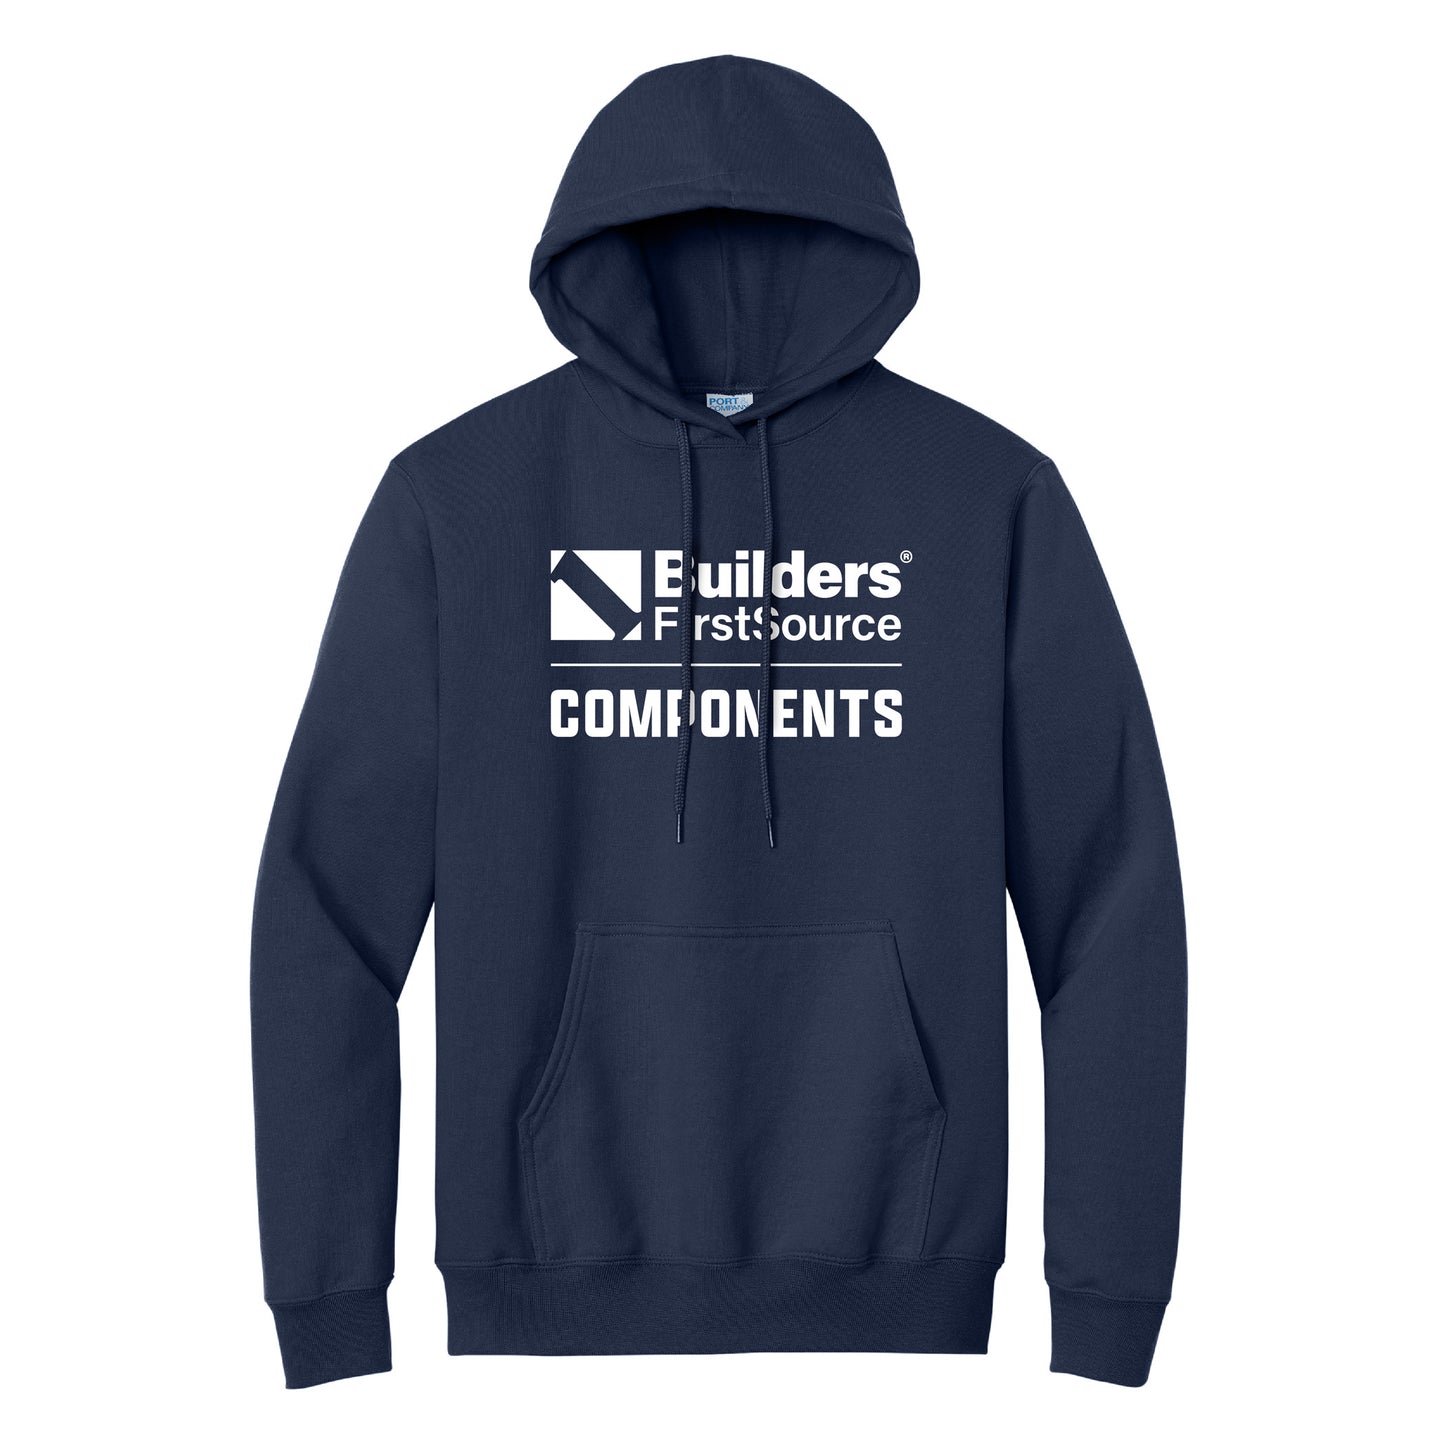 Components - Ultimate Pullover Hooded Sweatshirt